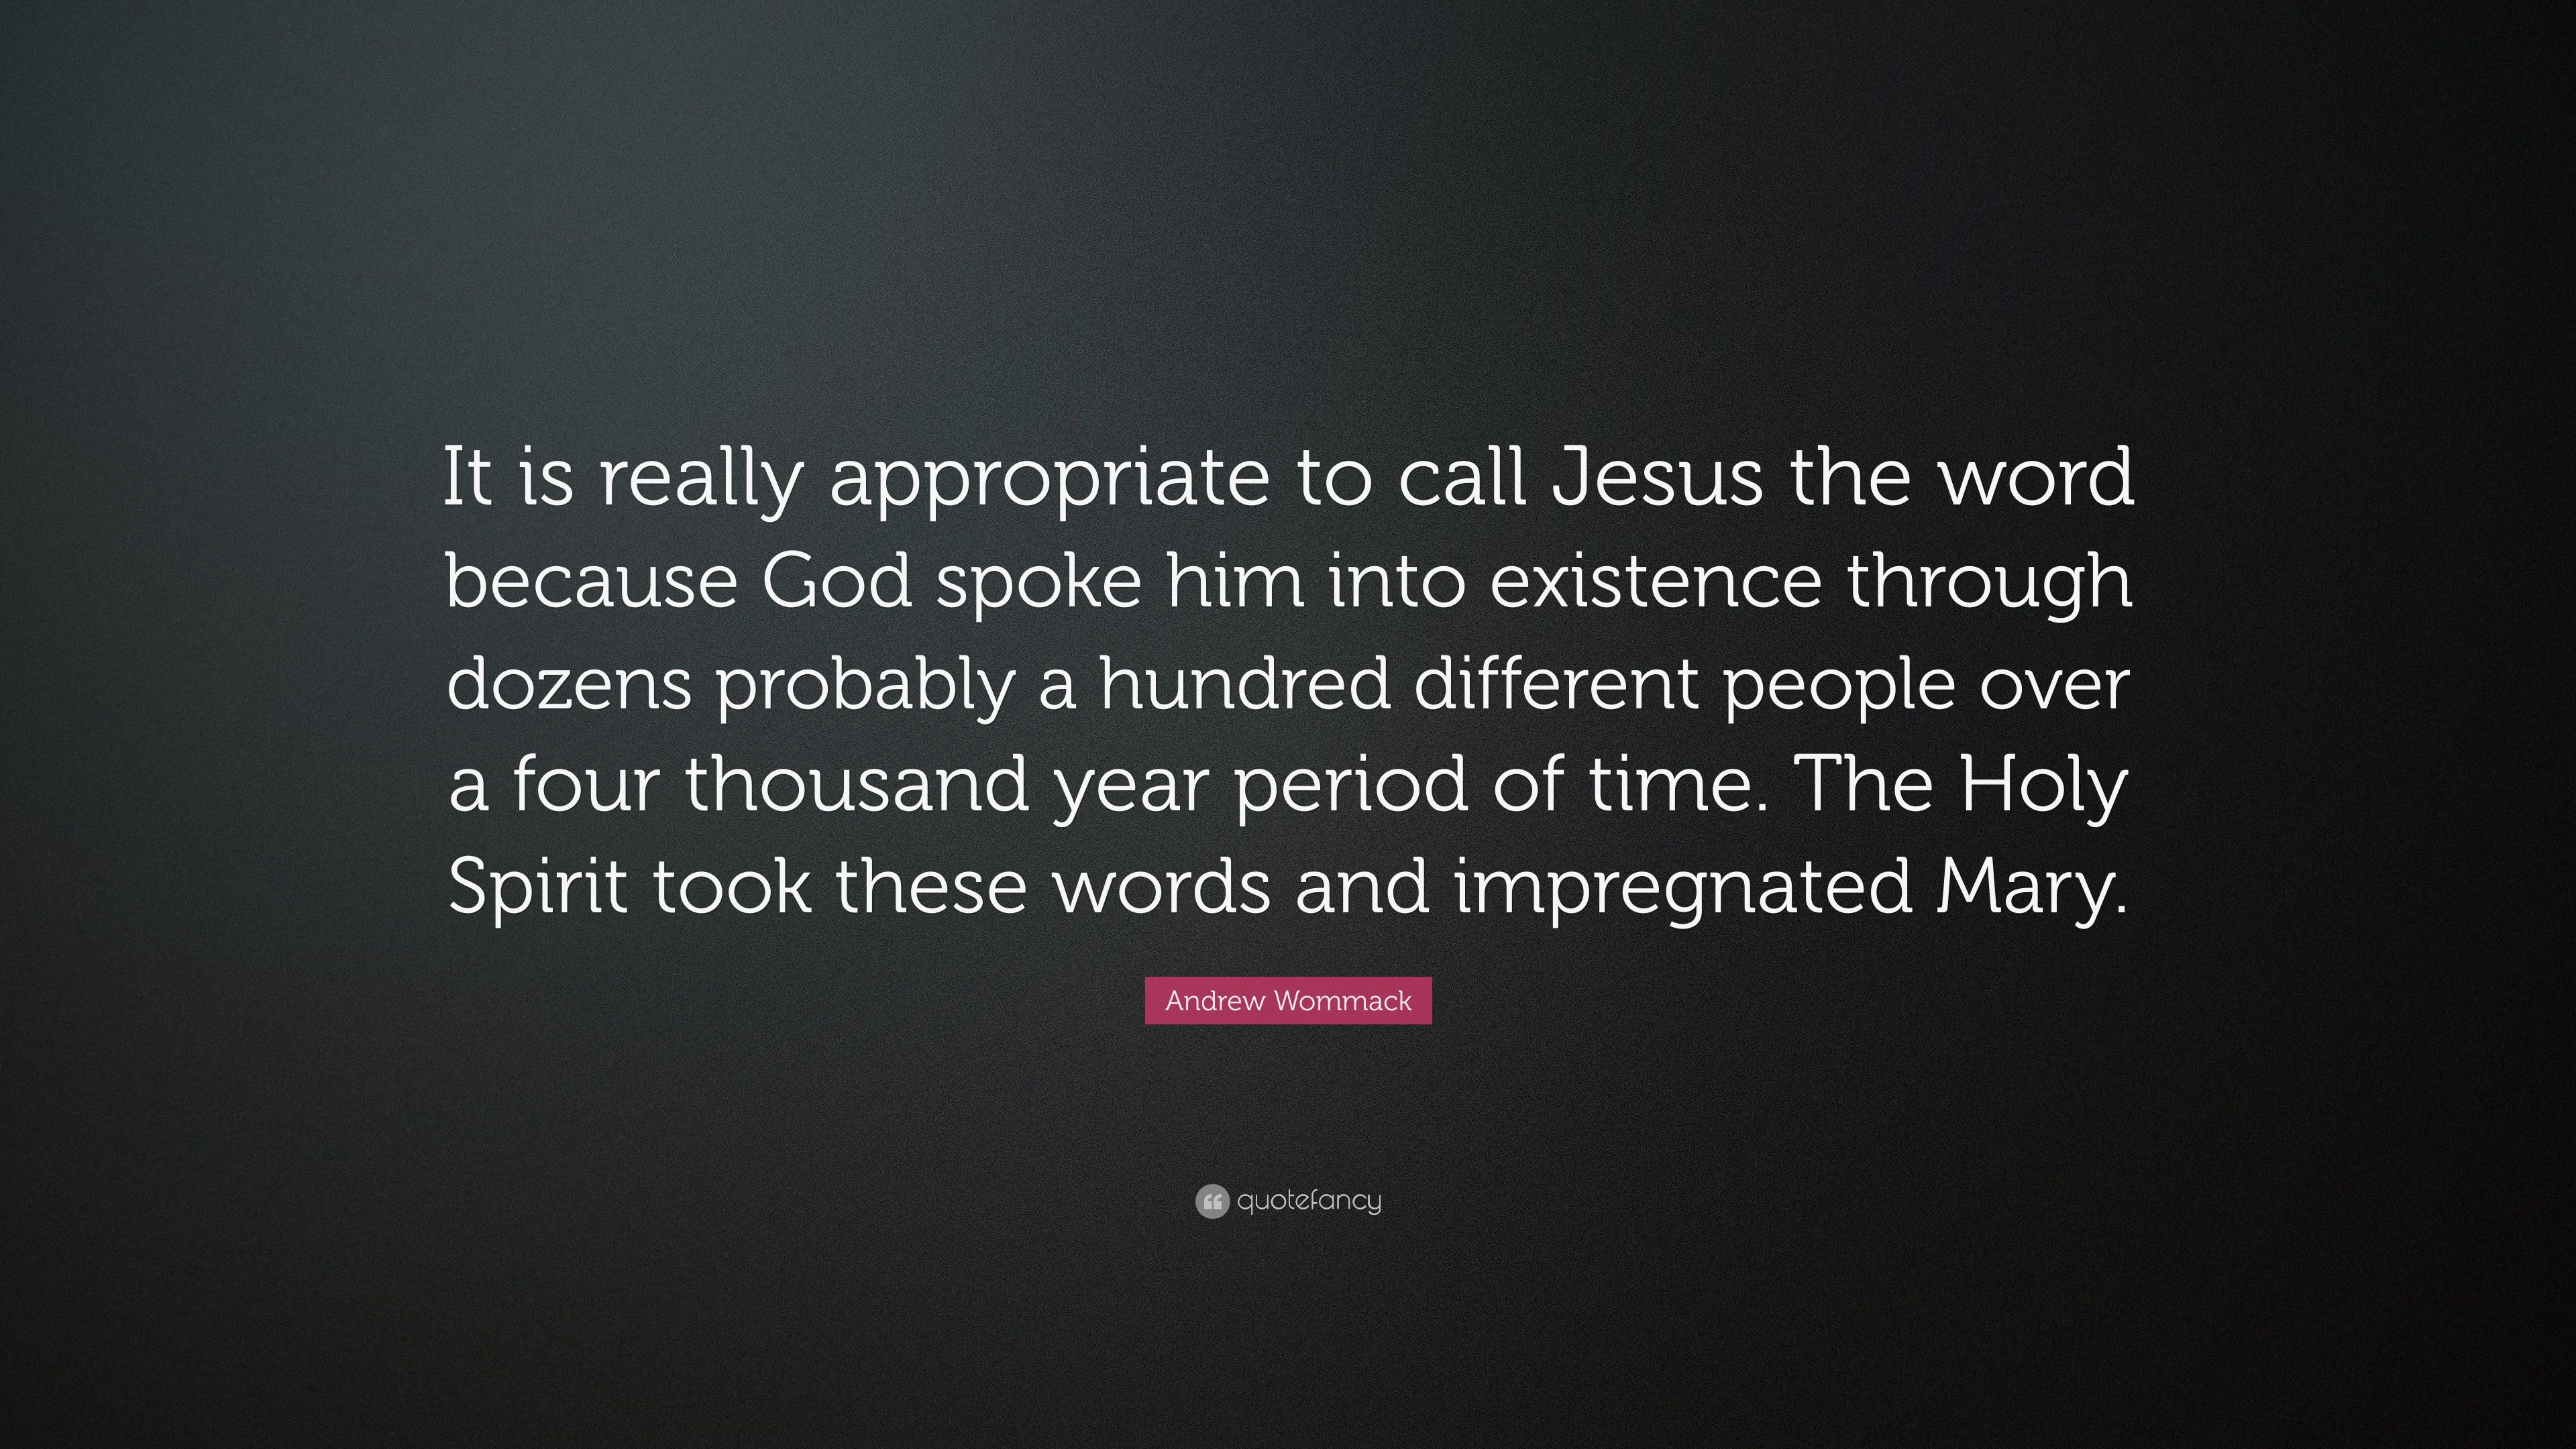 Andrew Wommack Quote: “It is really appropriate to call Jesus the word because God spoke him into existence through dozens probably a hundred d.” (7 wallpaper)